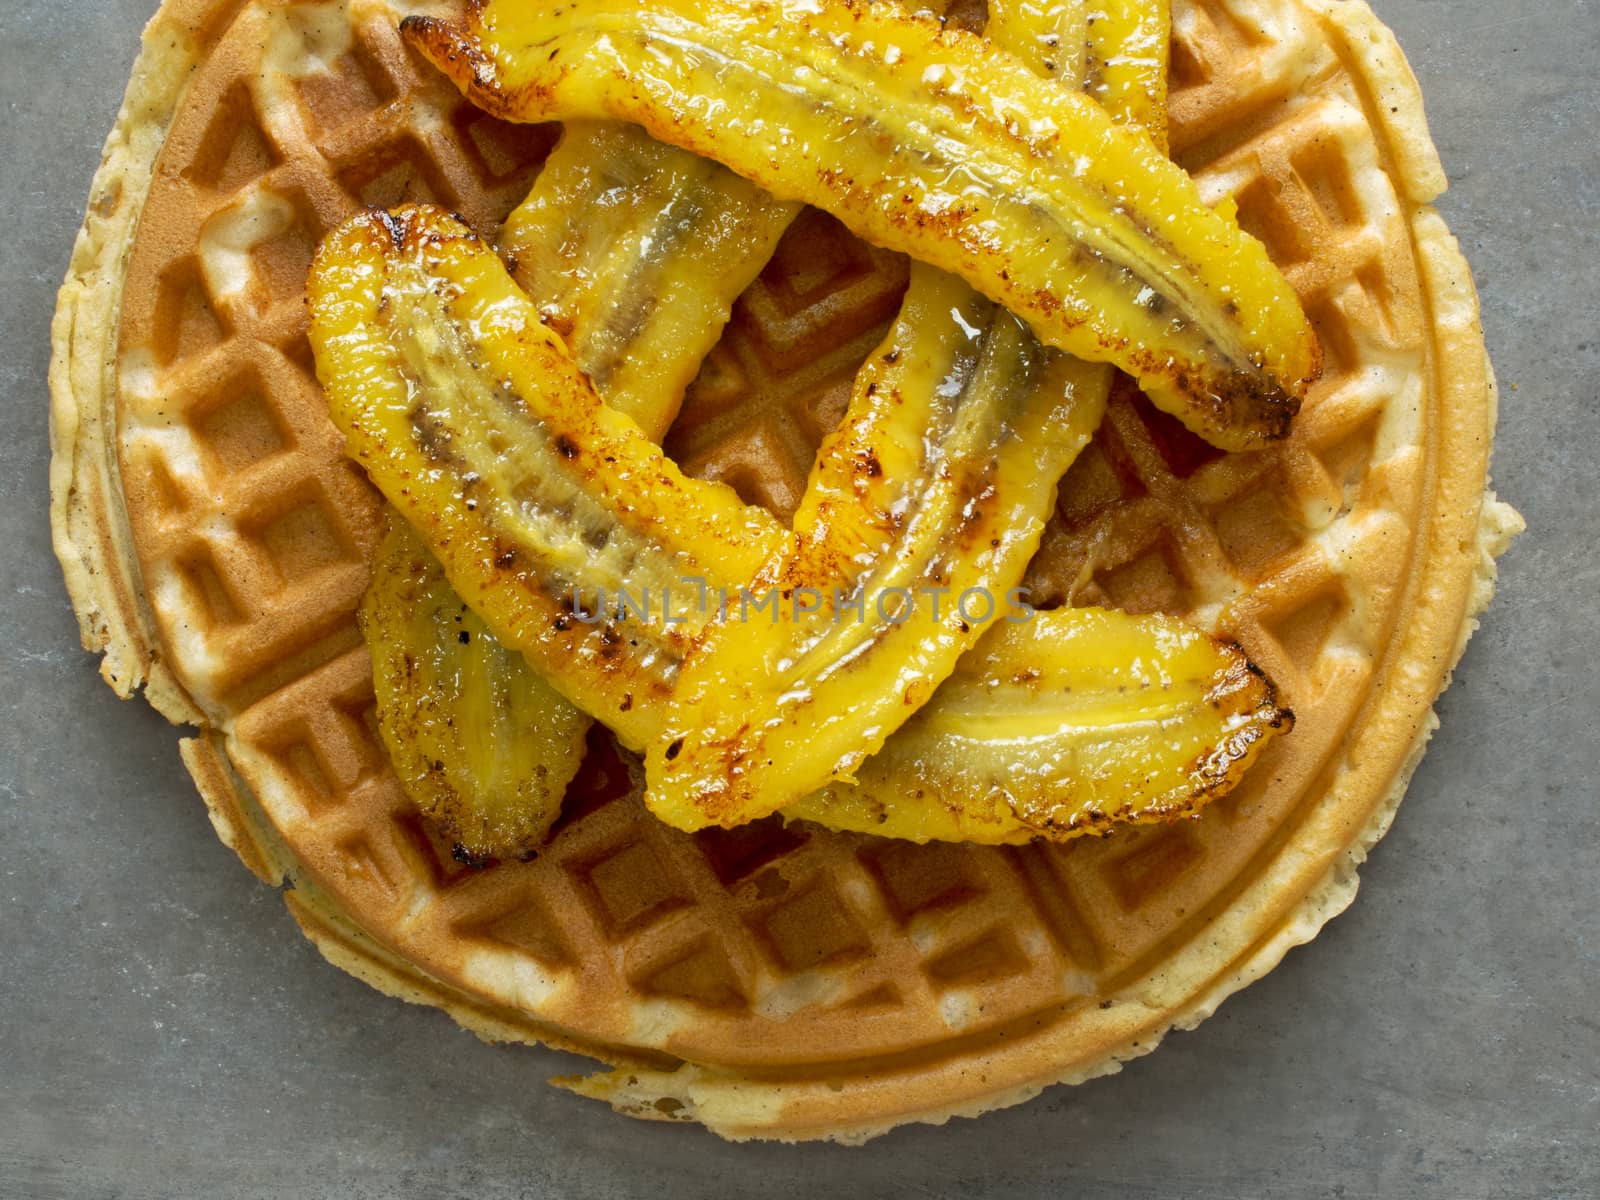 rustic sweet banana waffle by zkruger